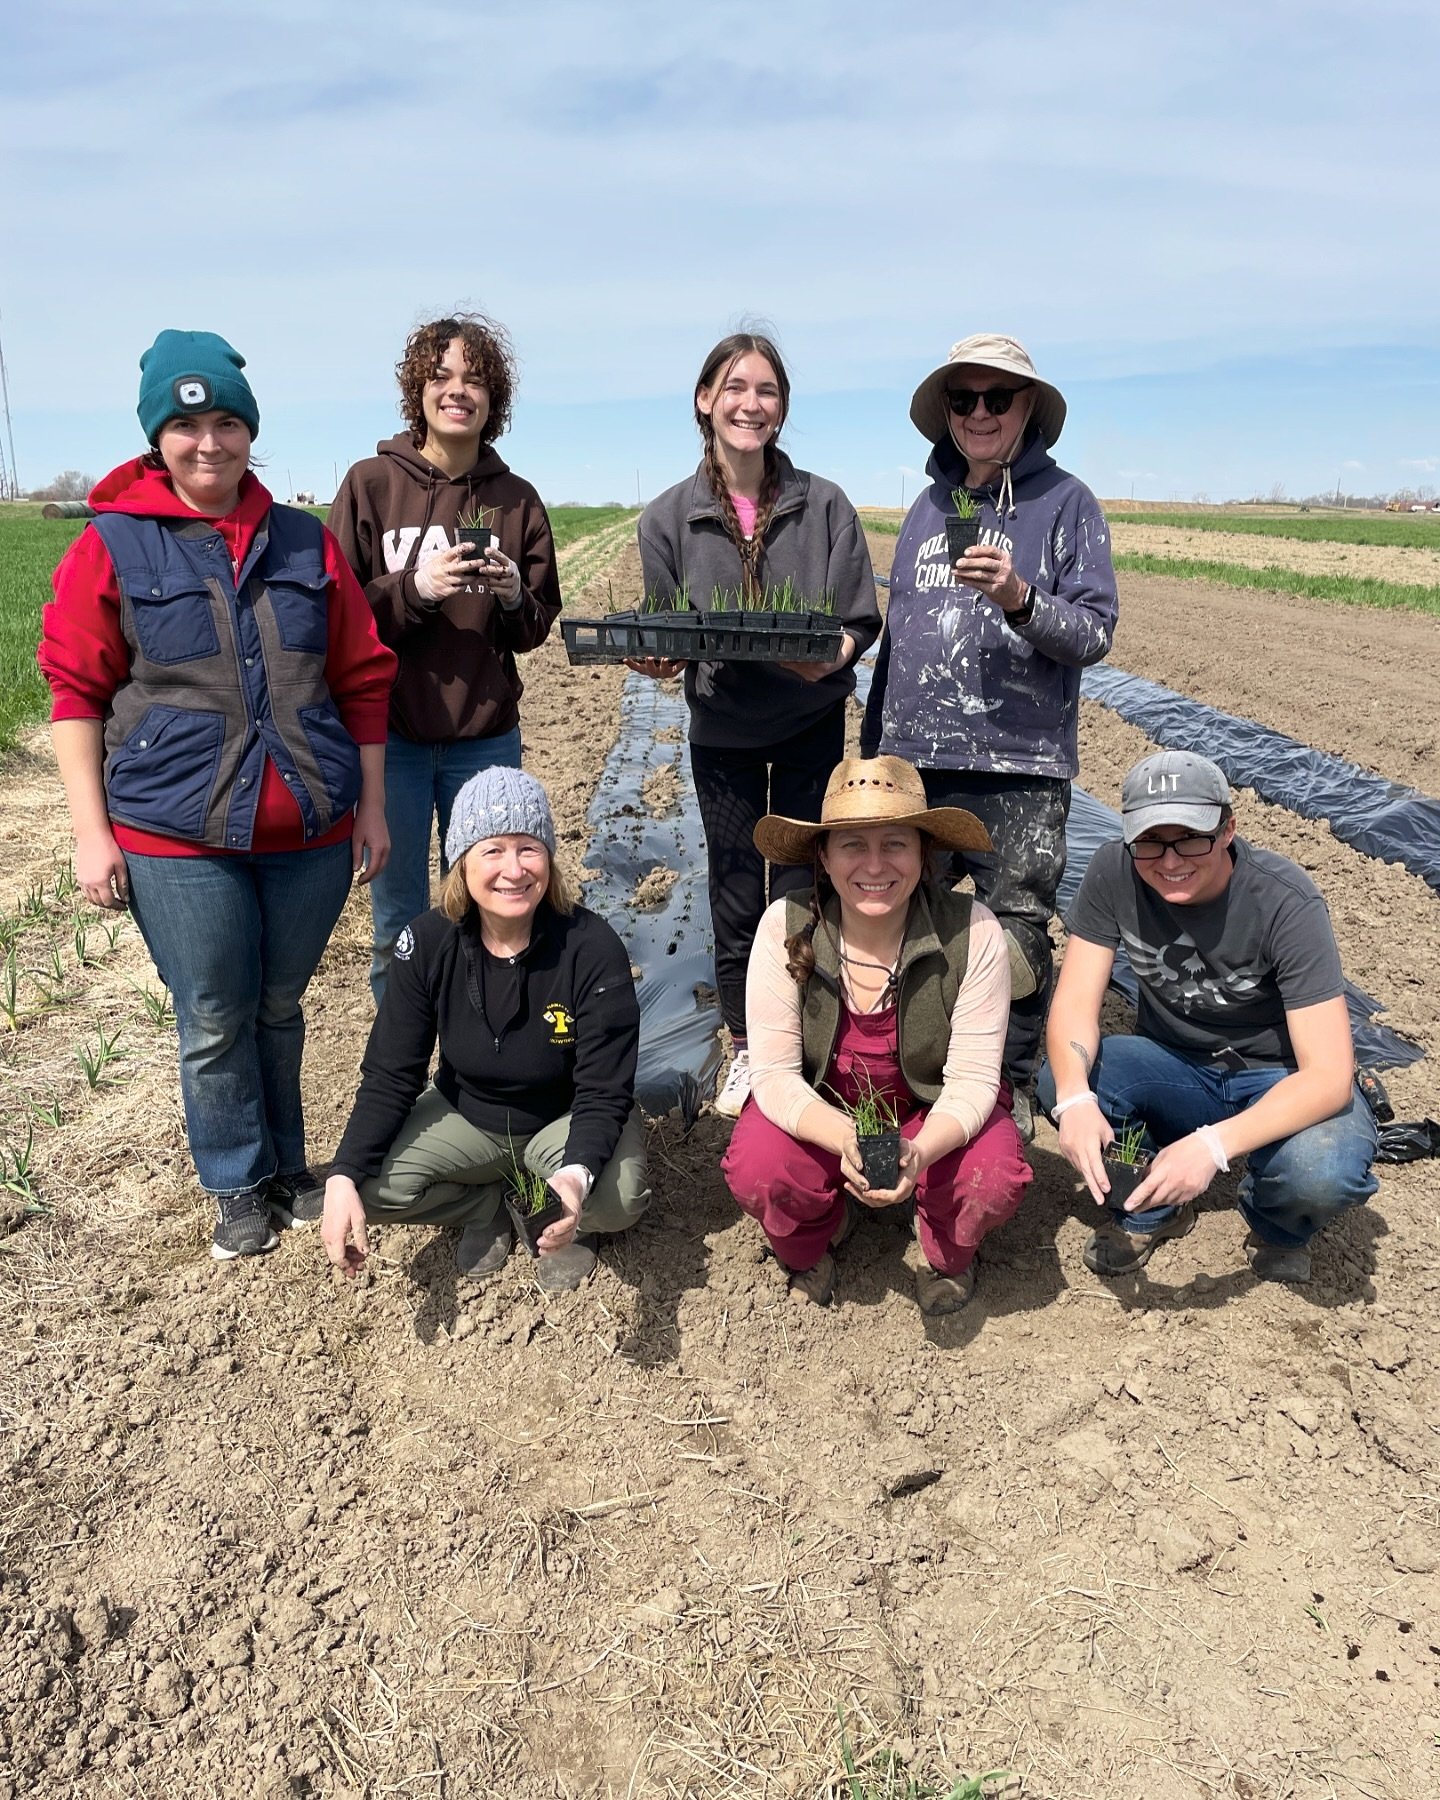 Big THANK YOU to the group that helped us plant onions this morning.

Join us on Friday morning from 9 am-noon for more fun in the sun. Email us at grow@ivrcd to help us plant more onions on Friday!

#onionon #onionplanting #springplanting #iowafarm 